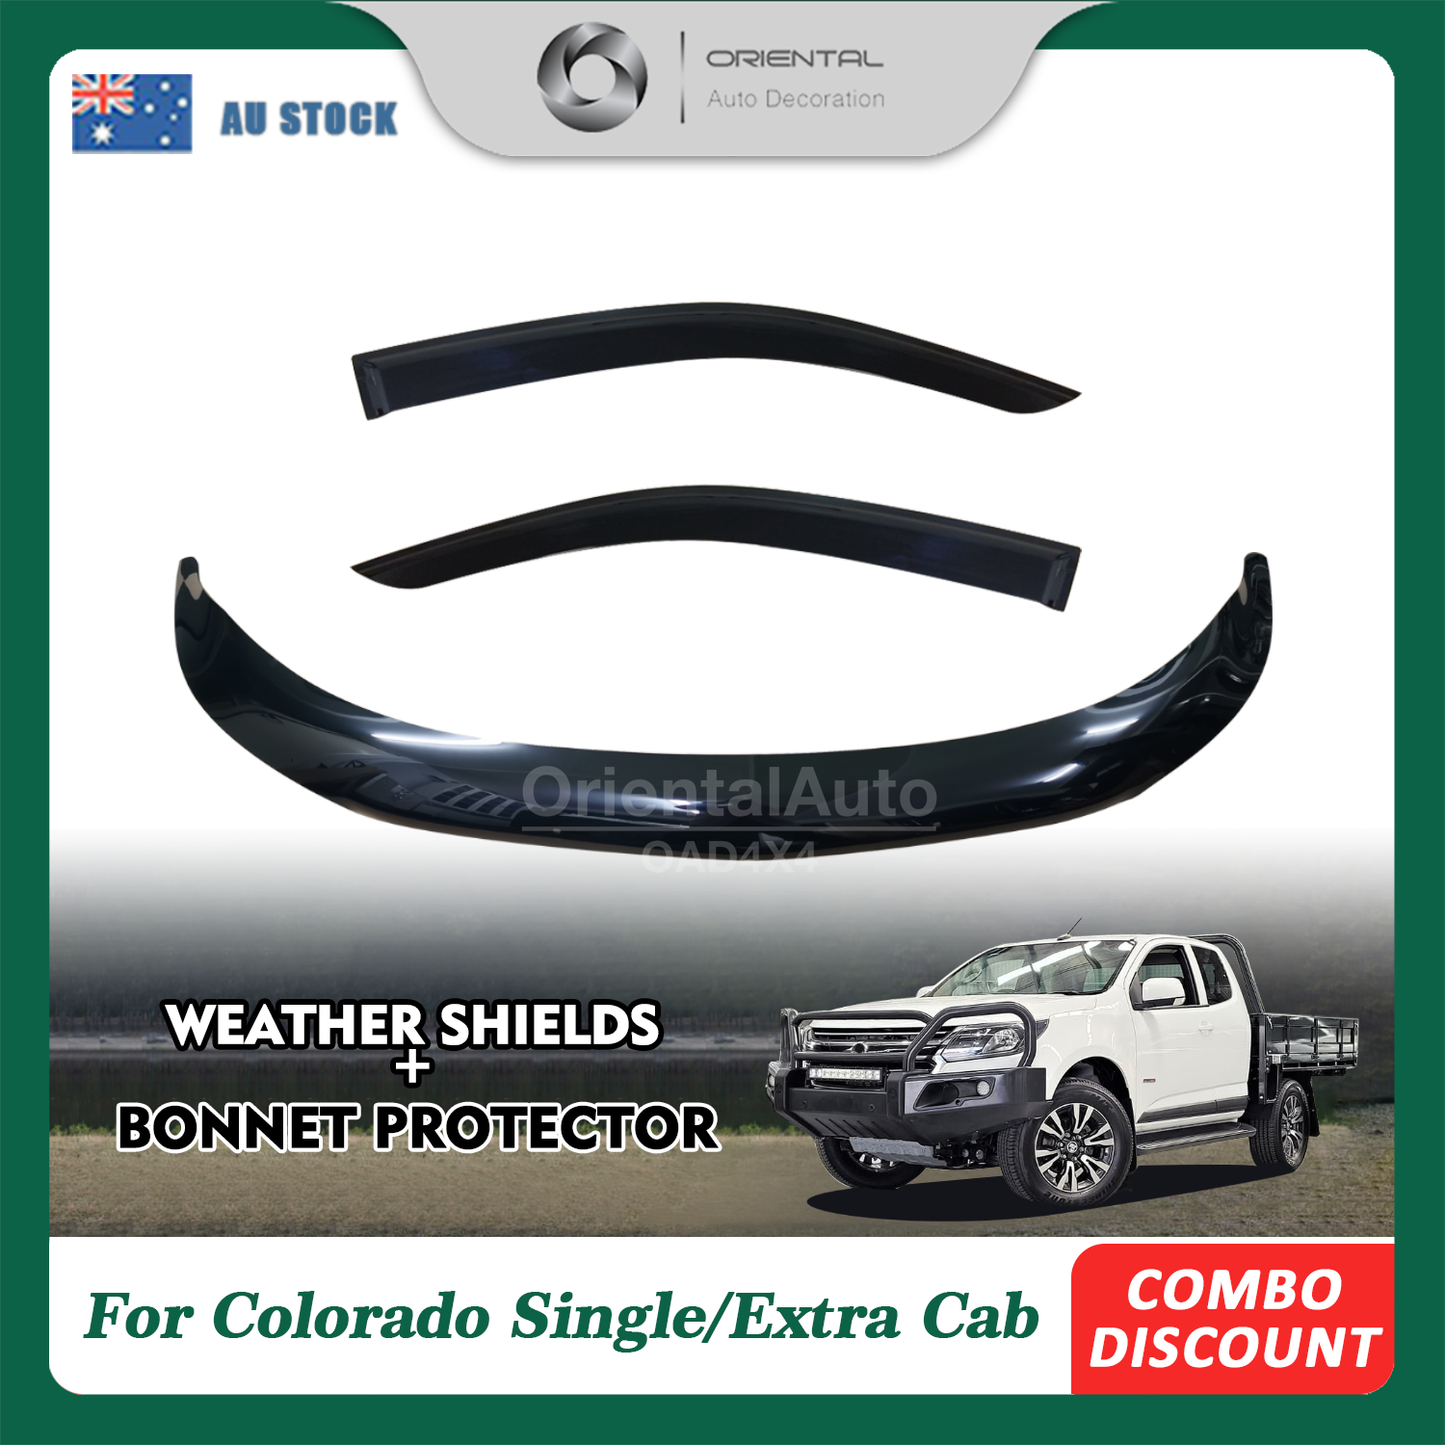 Bonnet Protector & Injection Weathershields Weather Shields Window Visor For Holden Colorado RG Series Single / Extra cab 2016+